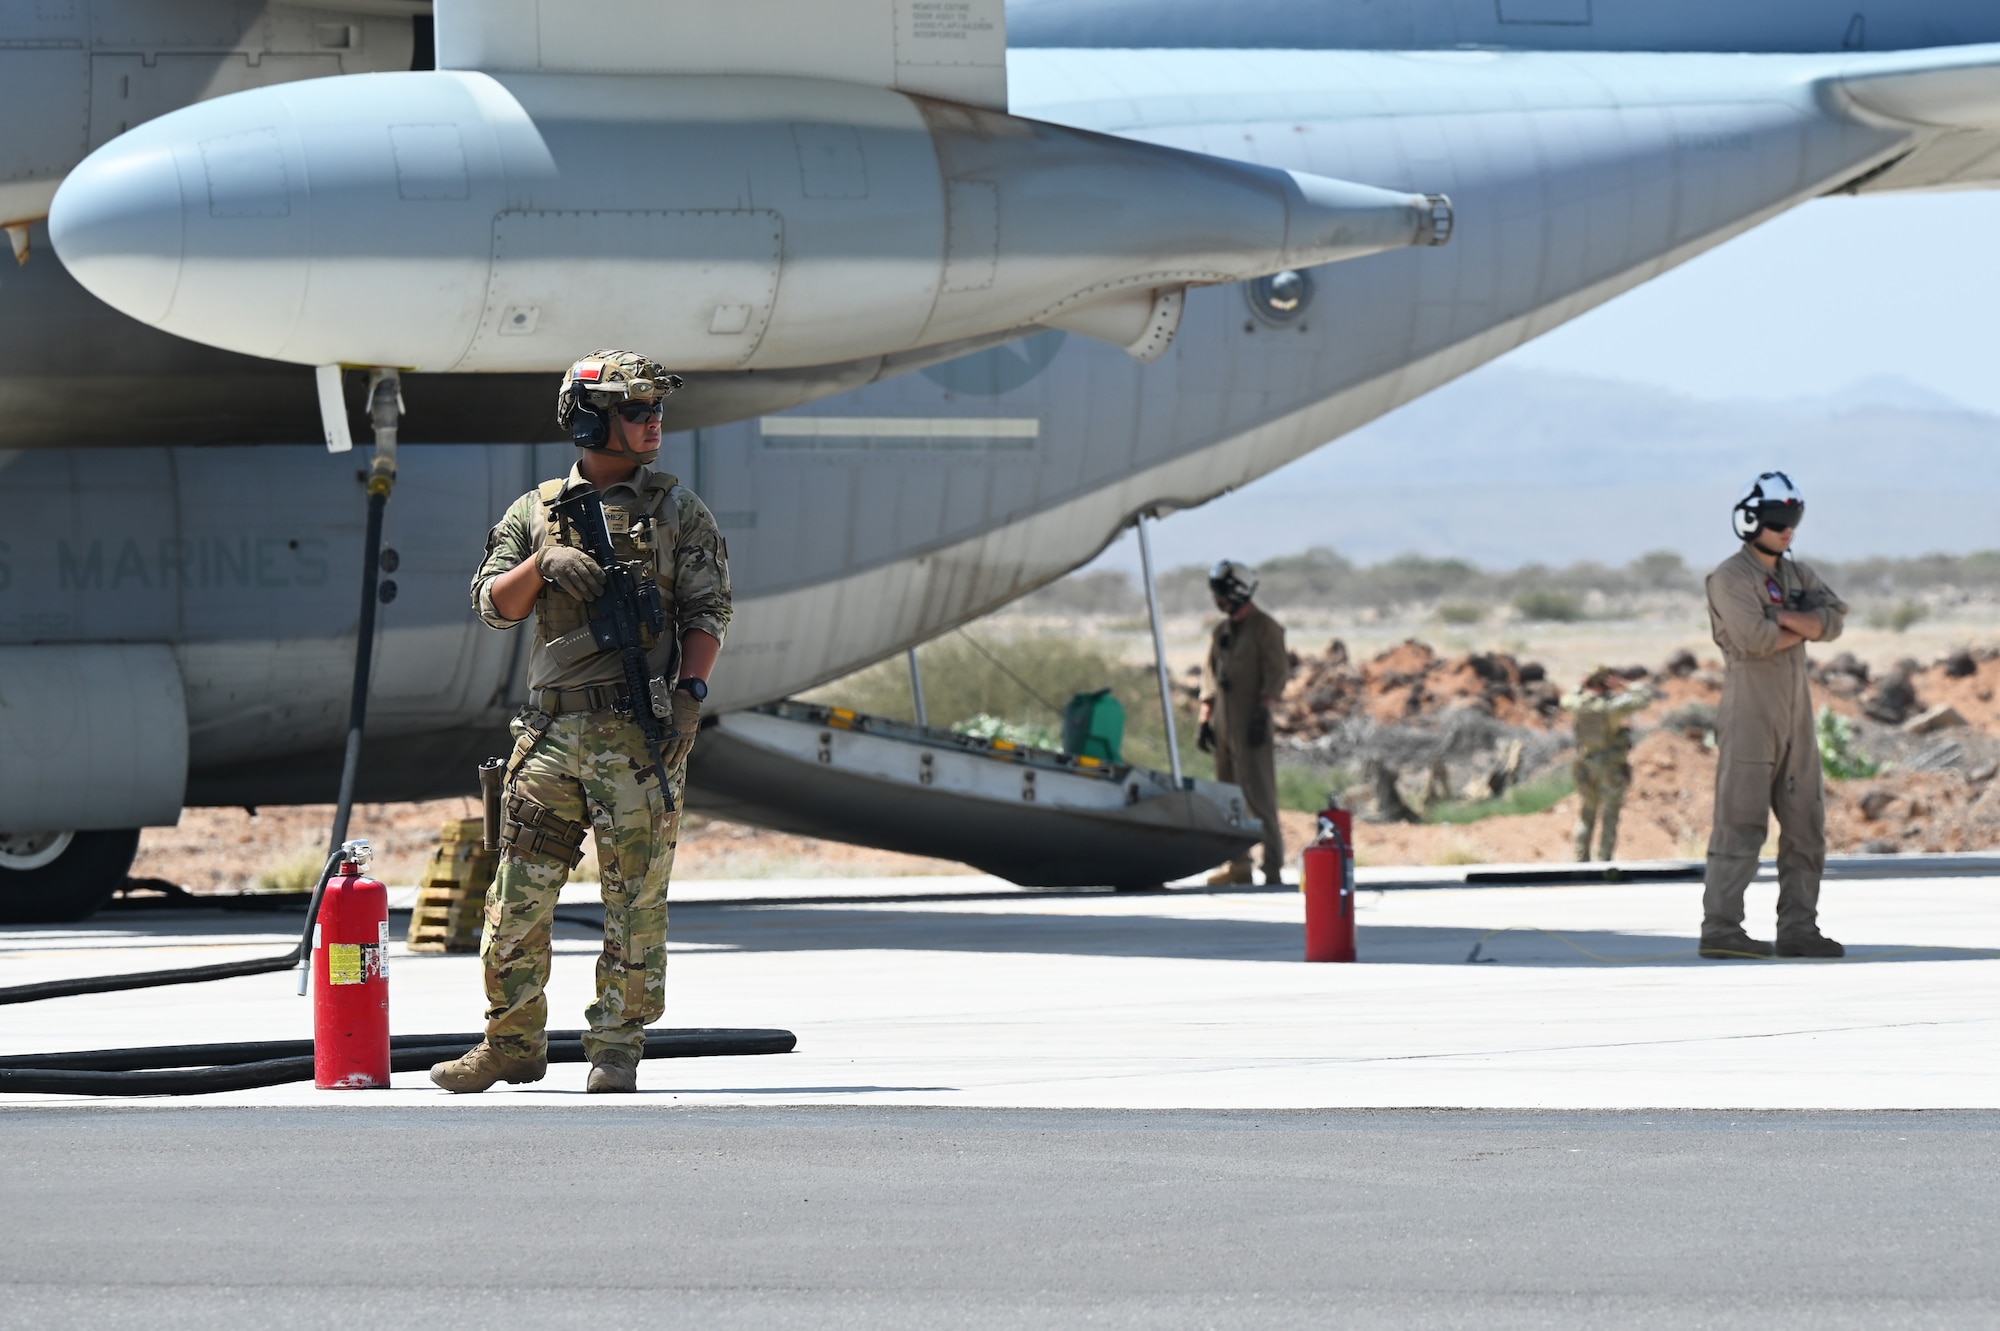 U.S. Army security personnel organize a perimeter around a KC-130 as its U.S. Marine Corps crew members unload supplies in support of a simulated Forward Arming and Refueling Point (FARP) exercise at Chabelley Airfield, Djibouti, Feb. 22, 2023. The ability of a Joint Force Commander to move their forces fluidly across the theater to seize, retain and utilize initiatives against an adversary is key to ensuring readiness and resilience, and protecting assets and personnel. (U.S. Air Force photo by Tech. Sgt. Jayson Burns)